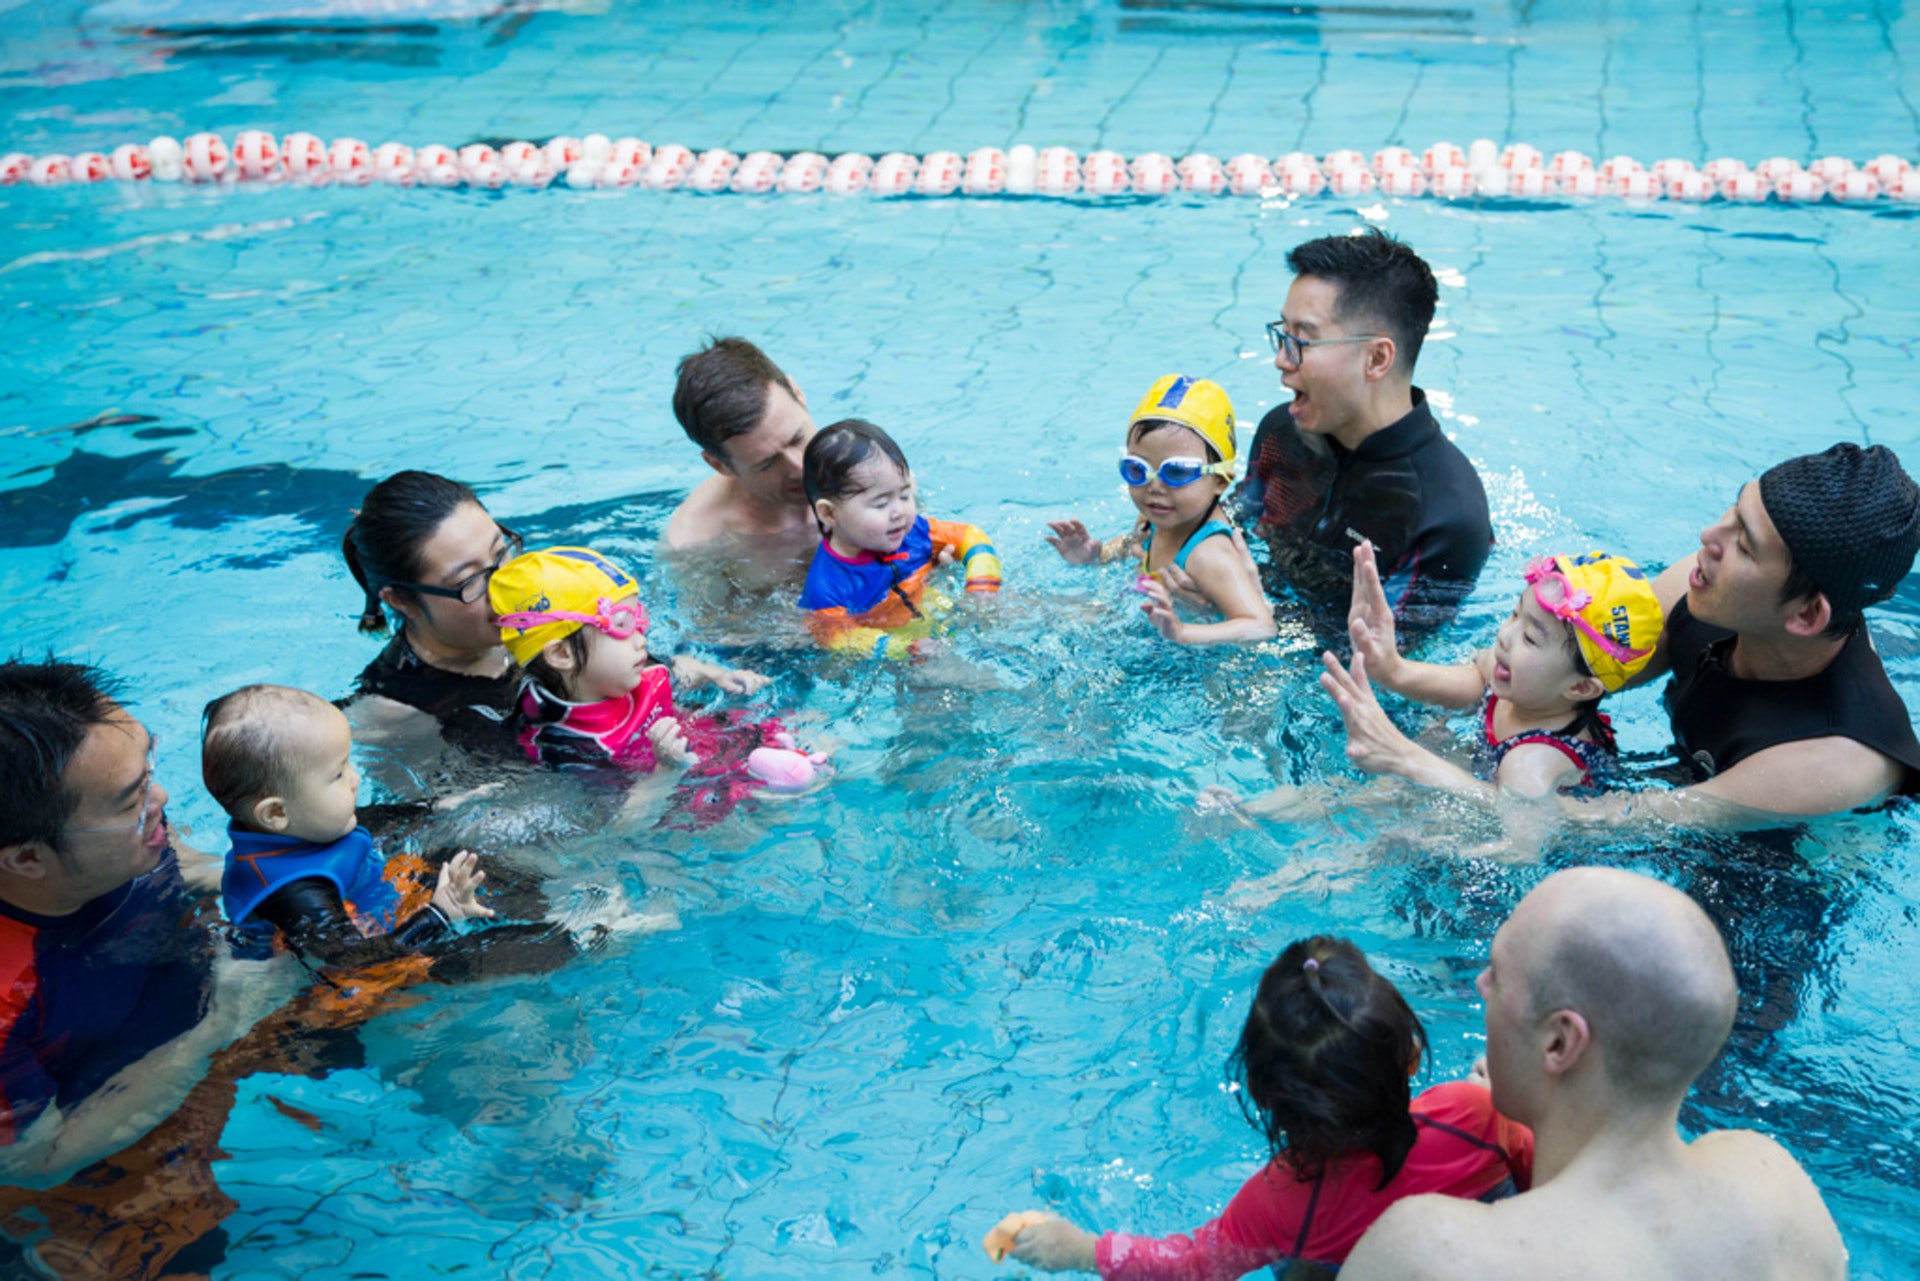 The Kinmen New Immigrants Learning Center runs "Parent-Child Swimming Class". Photo/Retrieved from "United Daily News"